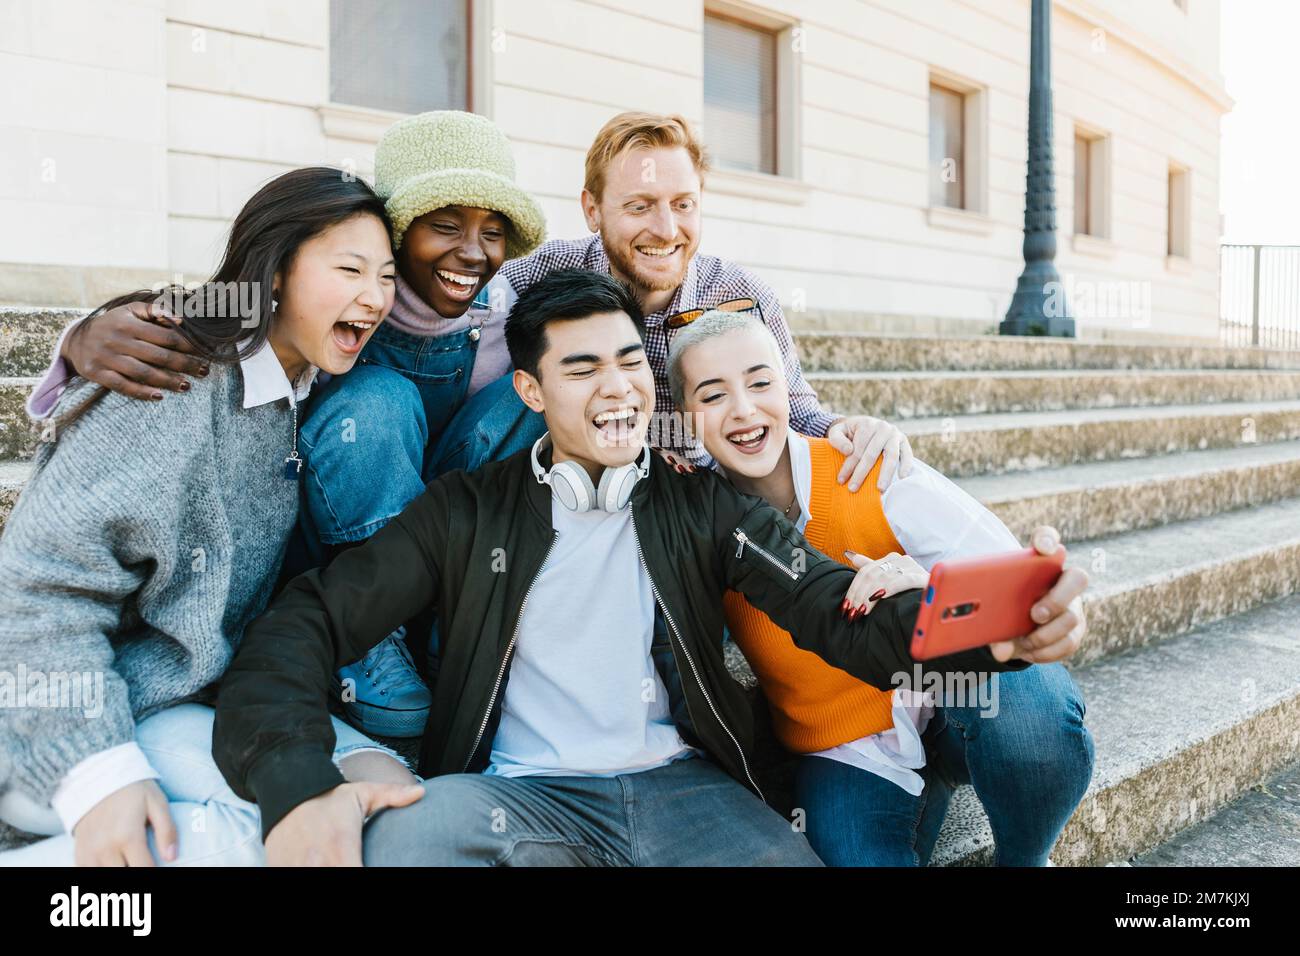 United group of young student friends having fun together Stock Photo